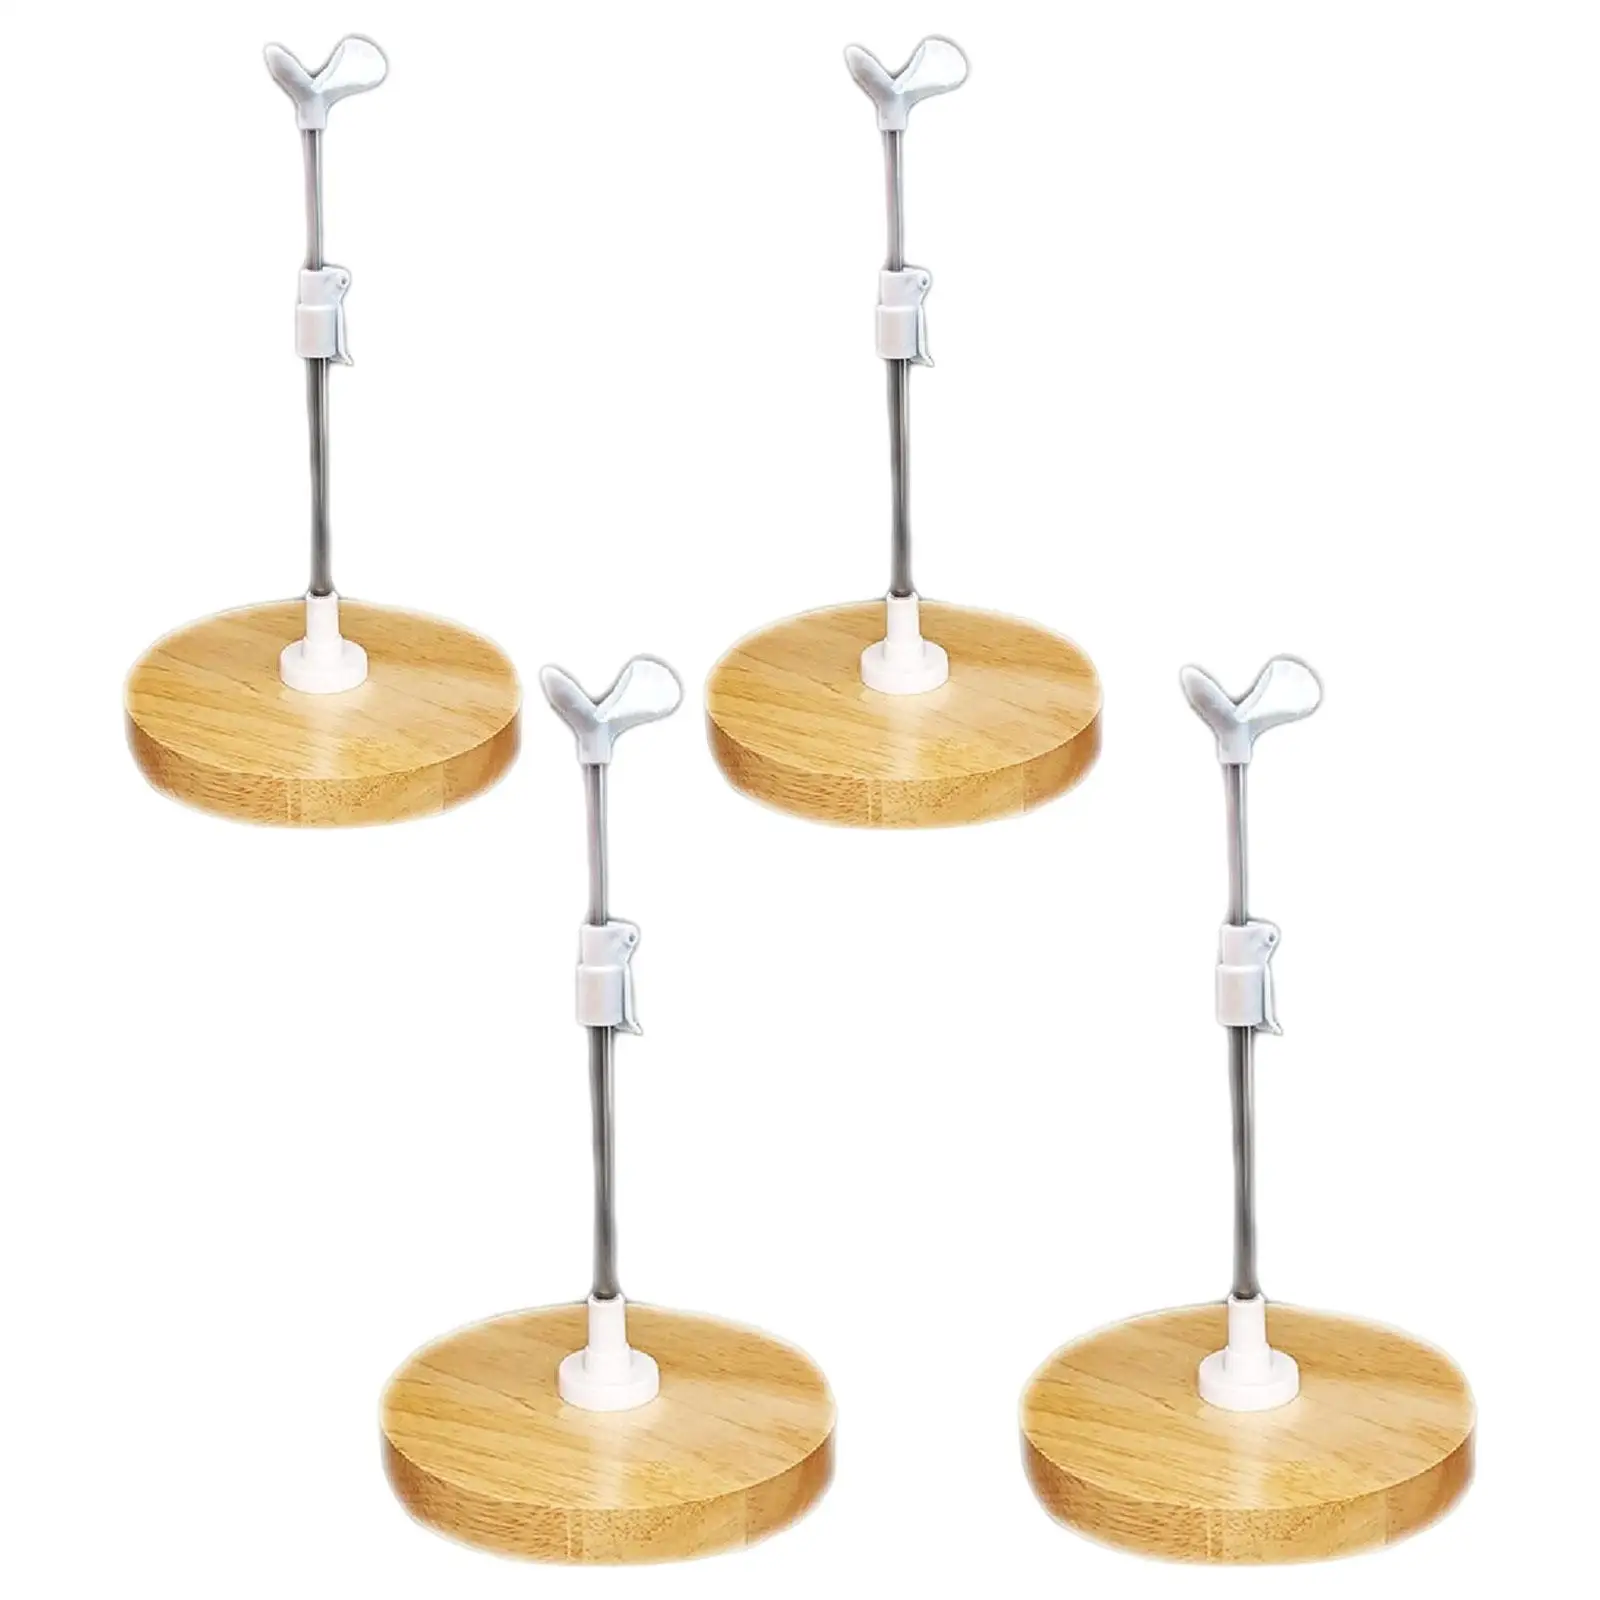 Doll Stand Support Adjustable Bracket Display for Fashion Dolls